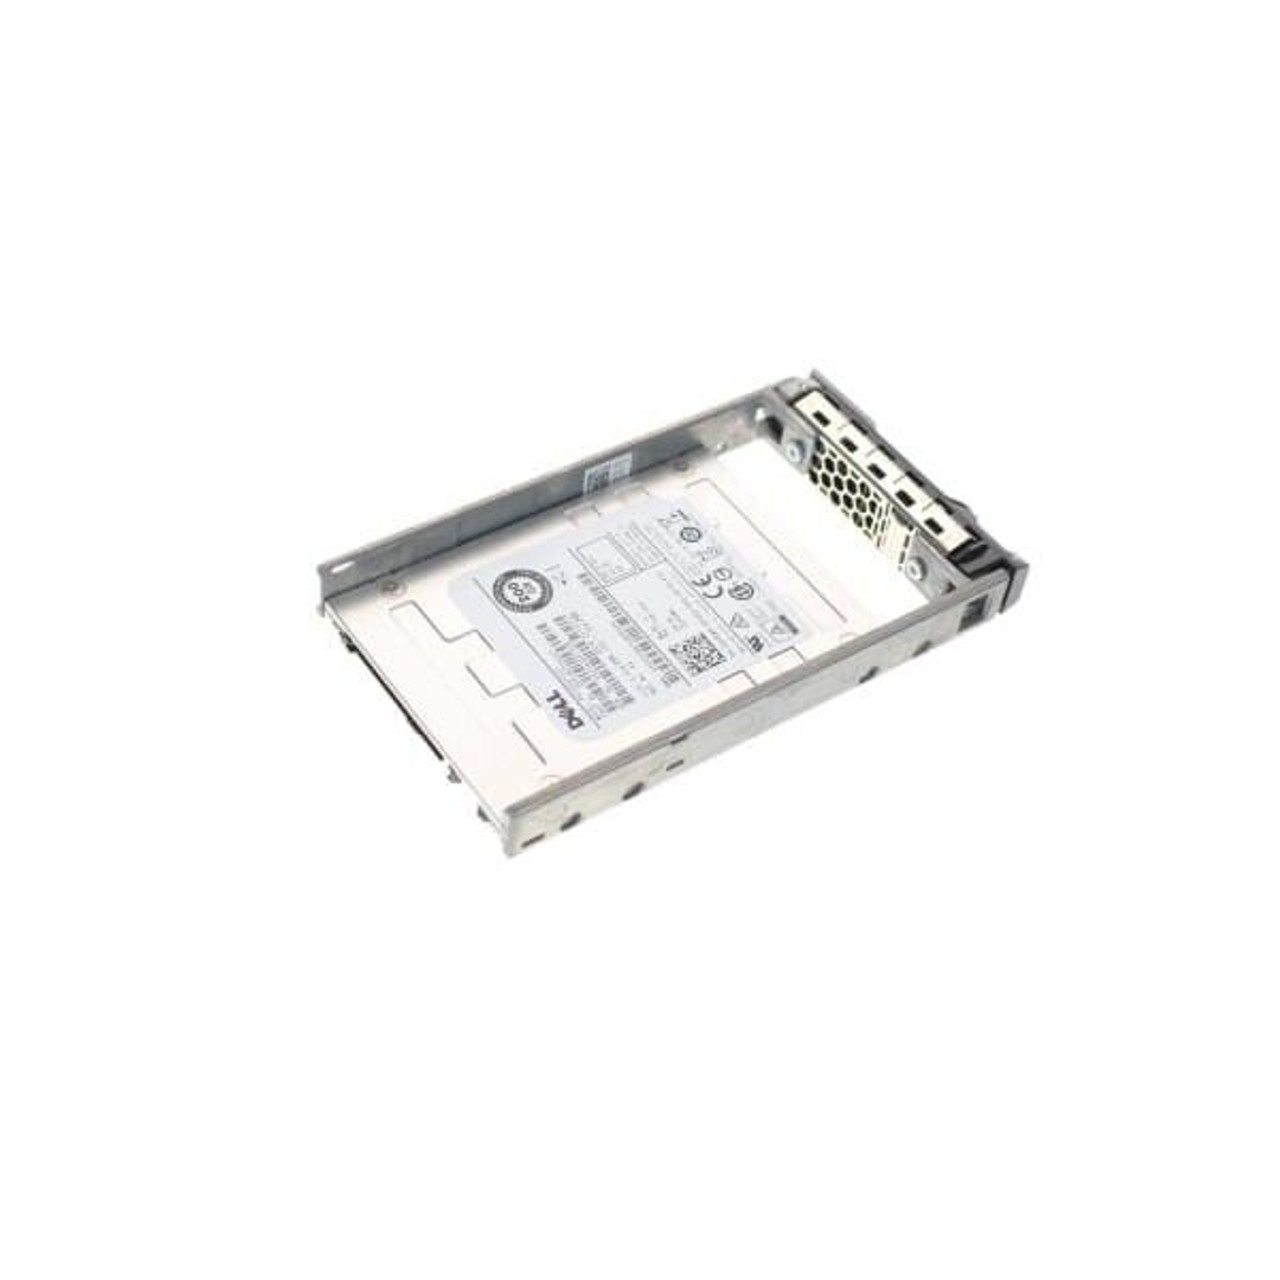 Dell CV6W8 200GB SAS 2.5" 12G WI SSD Solid State Drive PX02SSF0 zxy